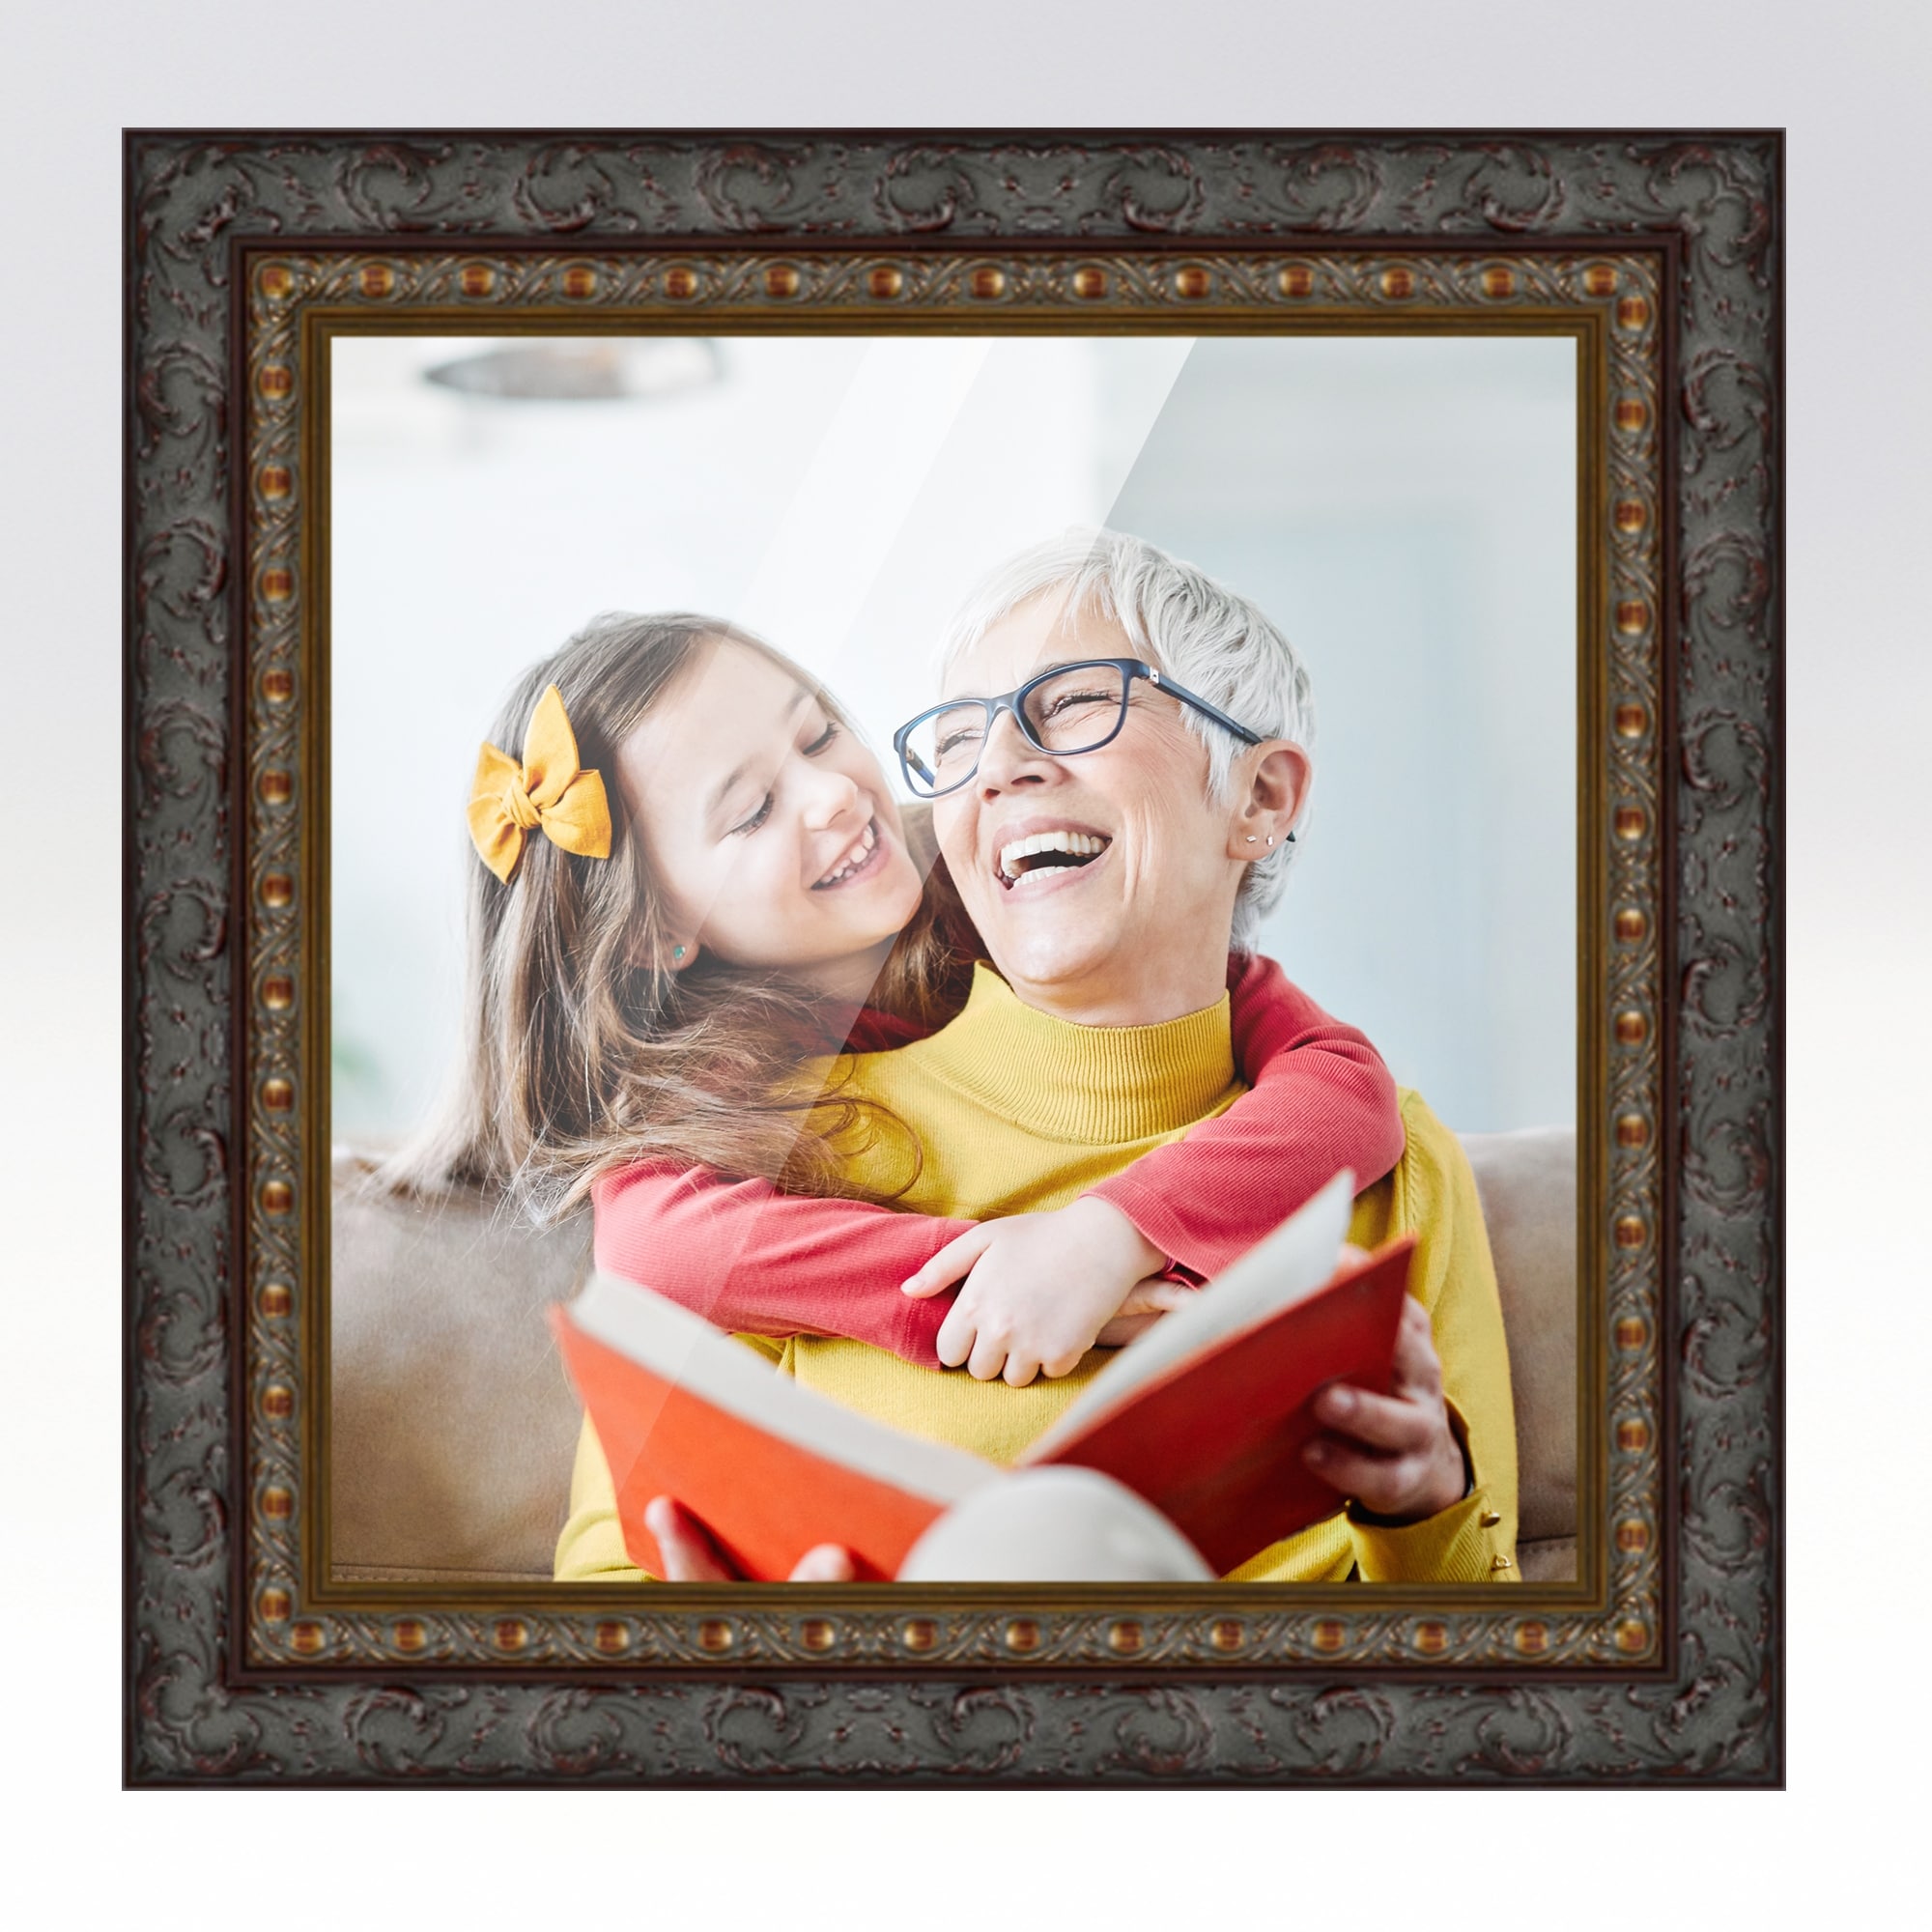 https://ak1.ostkcdn.com/images/products/is/images/direct/78b9679390322c65f56c5c37419a4ff1602a11c6/30x30-Black-Picture-Frame---Wood-Picture-Frame-Complete-with-UV.jpg